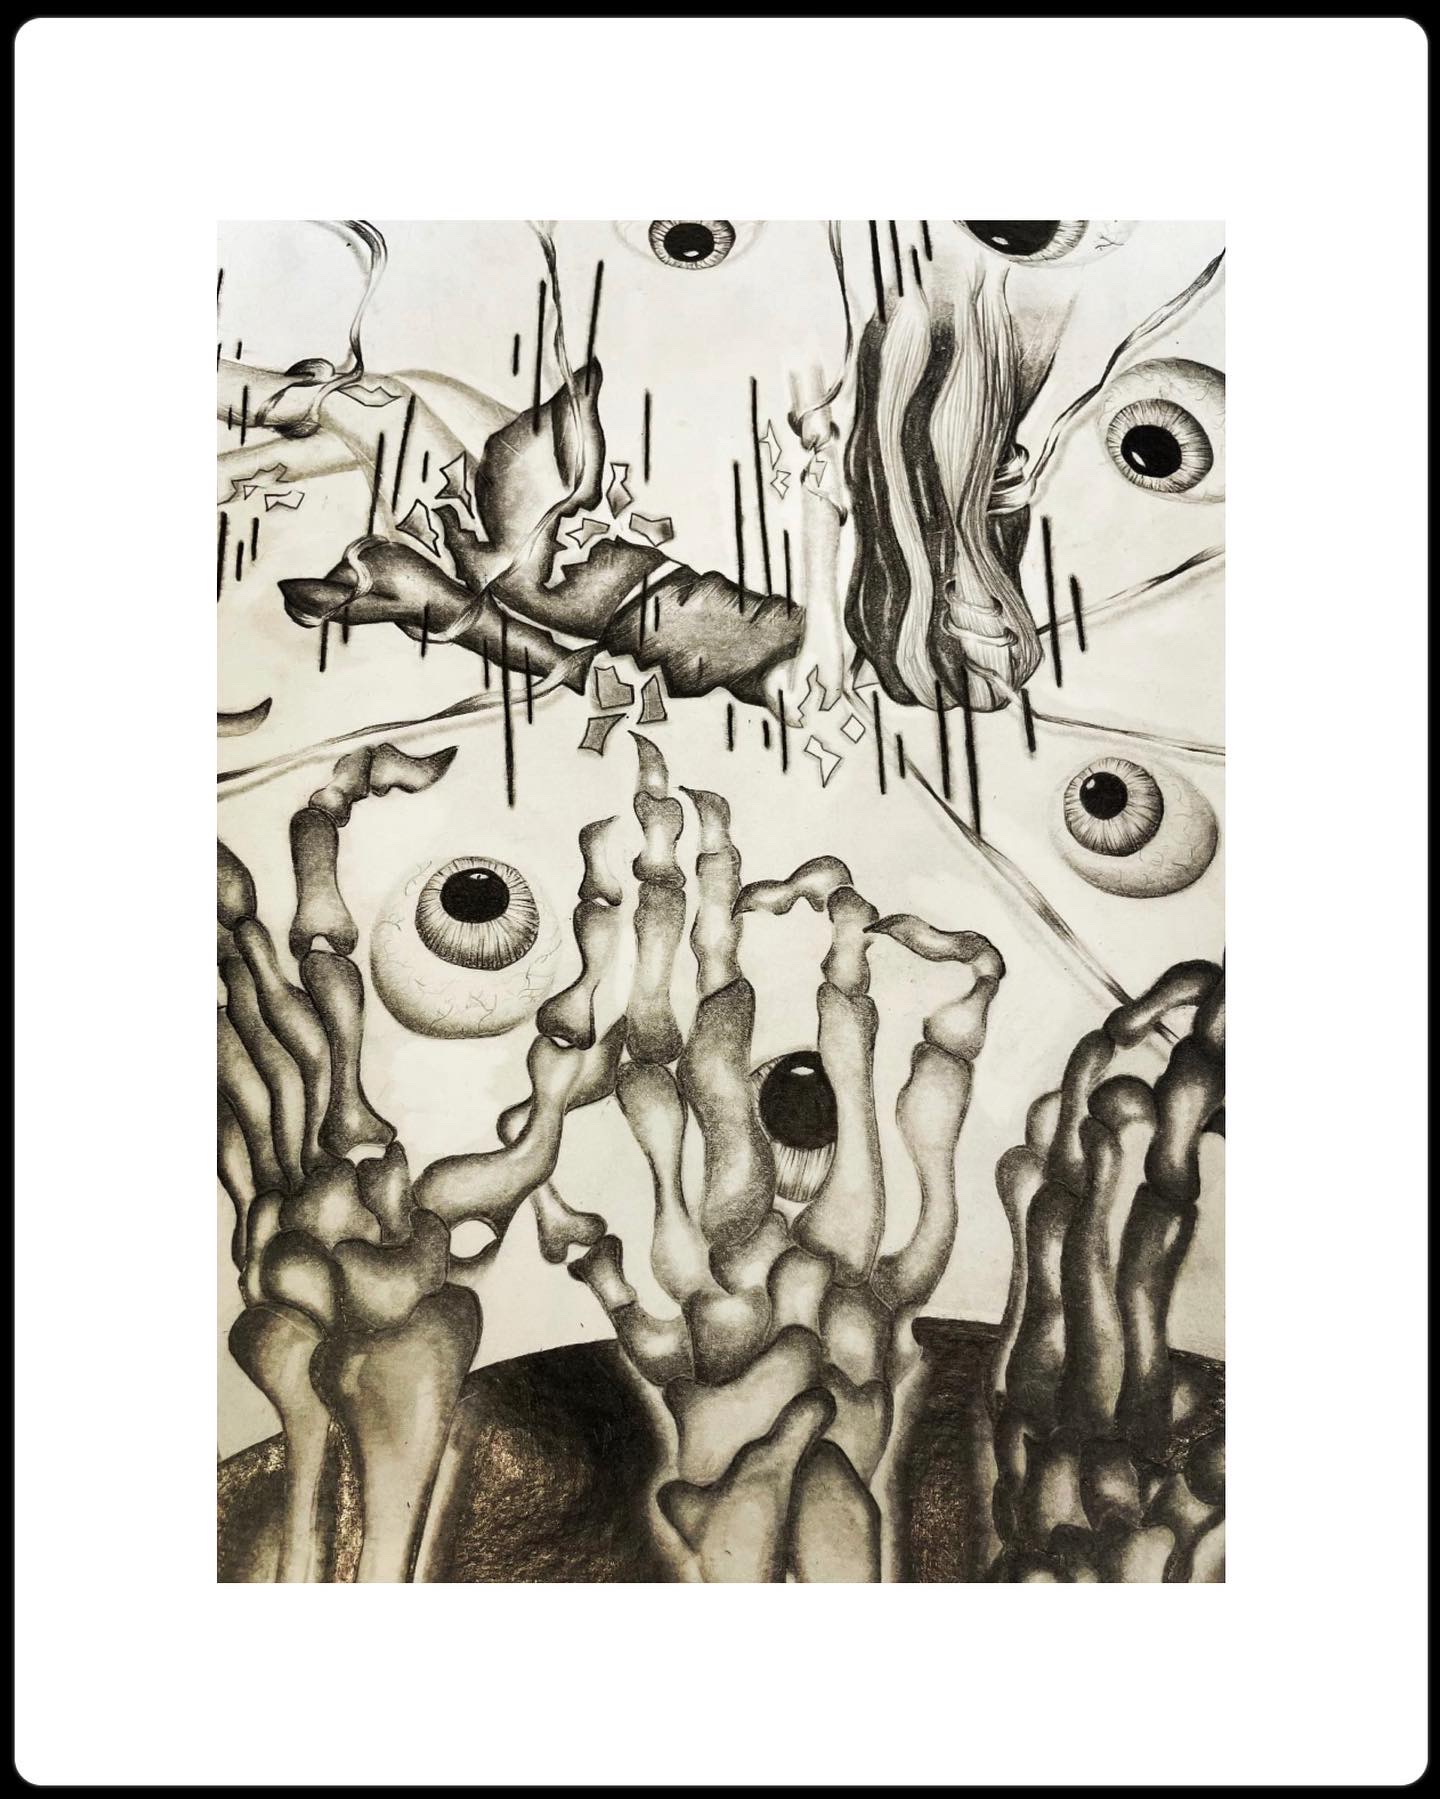 A black and white painting with several skeleton hands and eyeballs